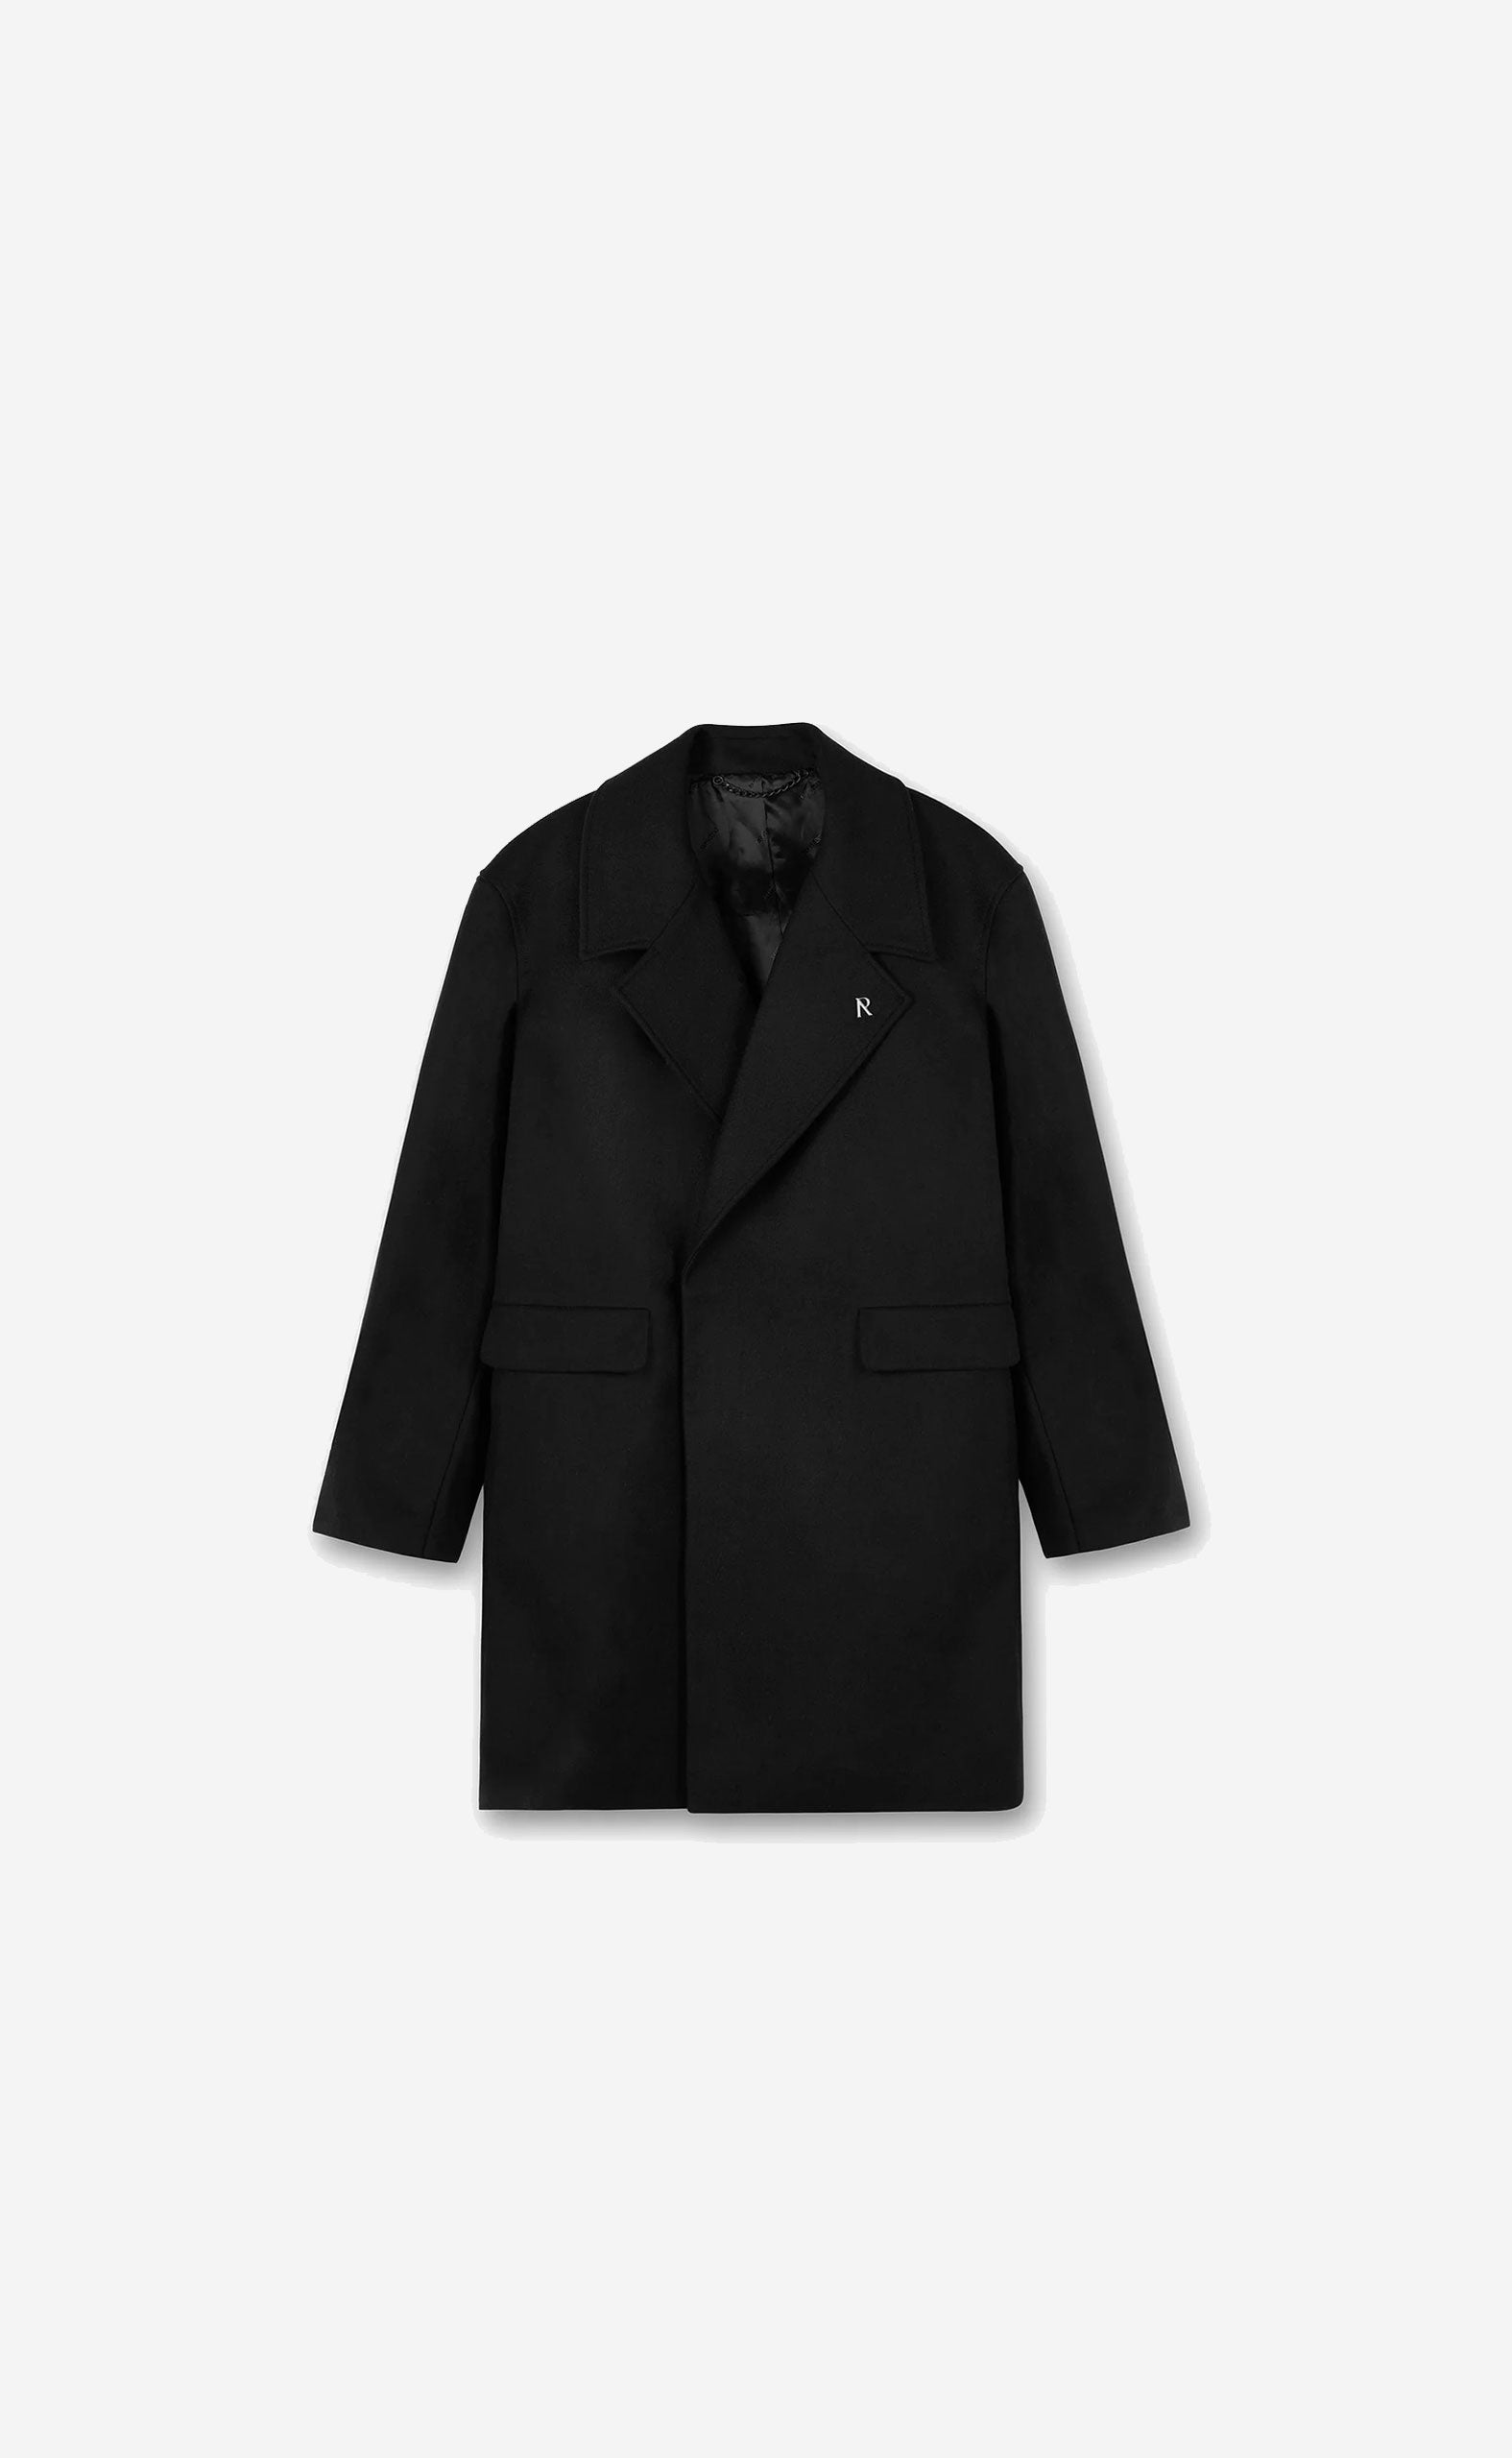 JET BLACK DOUBLE BREASTED OVERCOAT